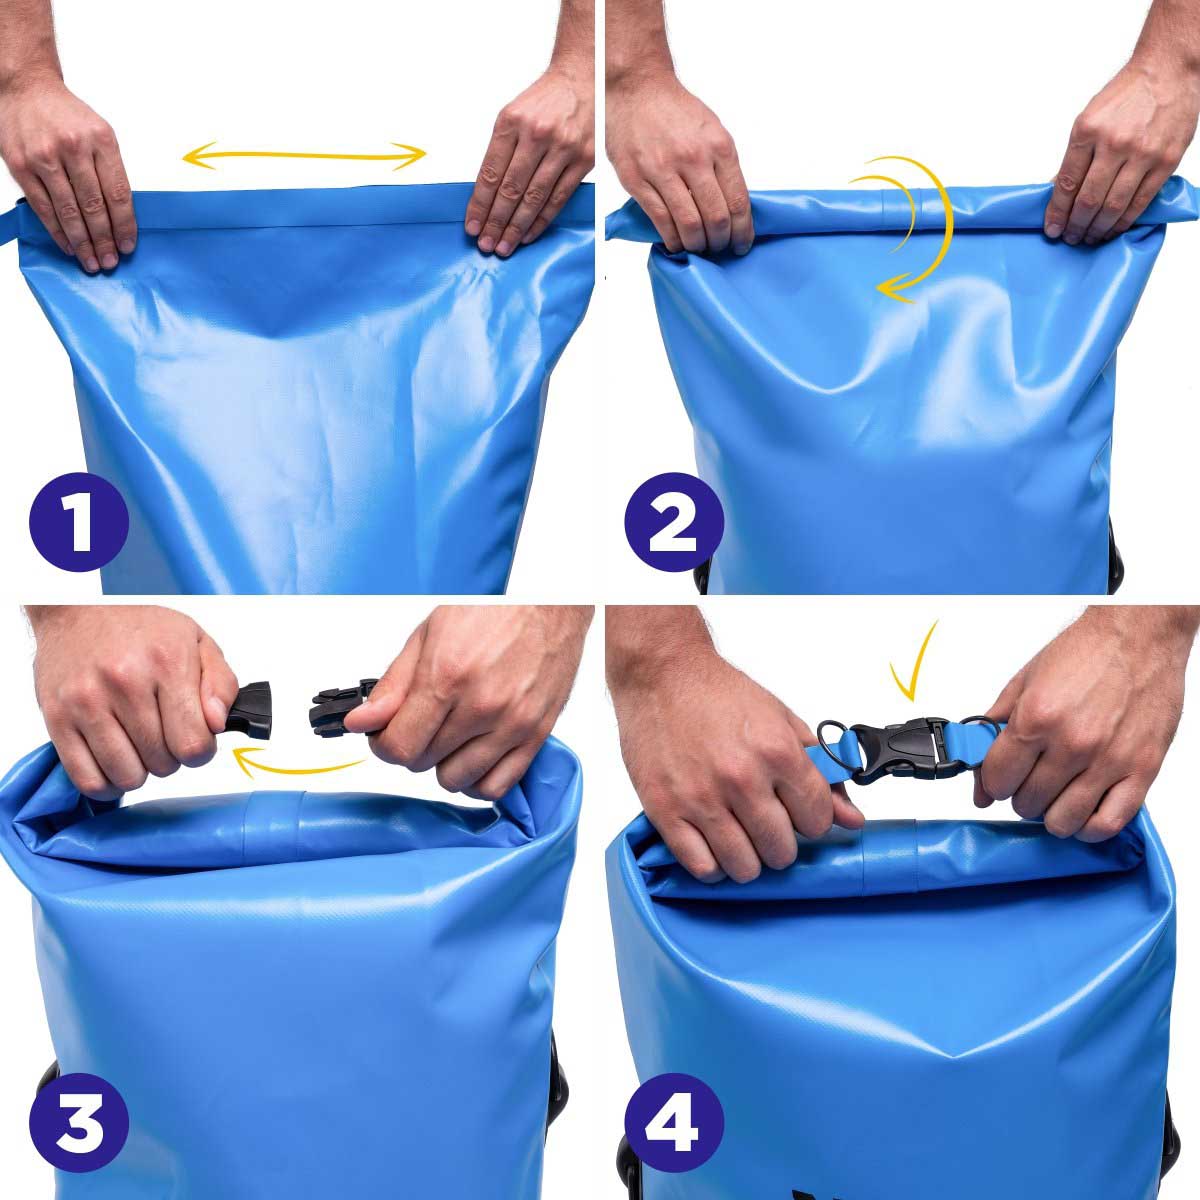 15 L Small Portable Waterproof Dry Bag is easy to lock